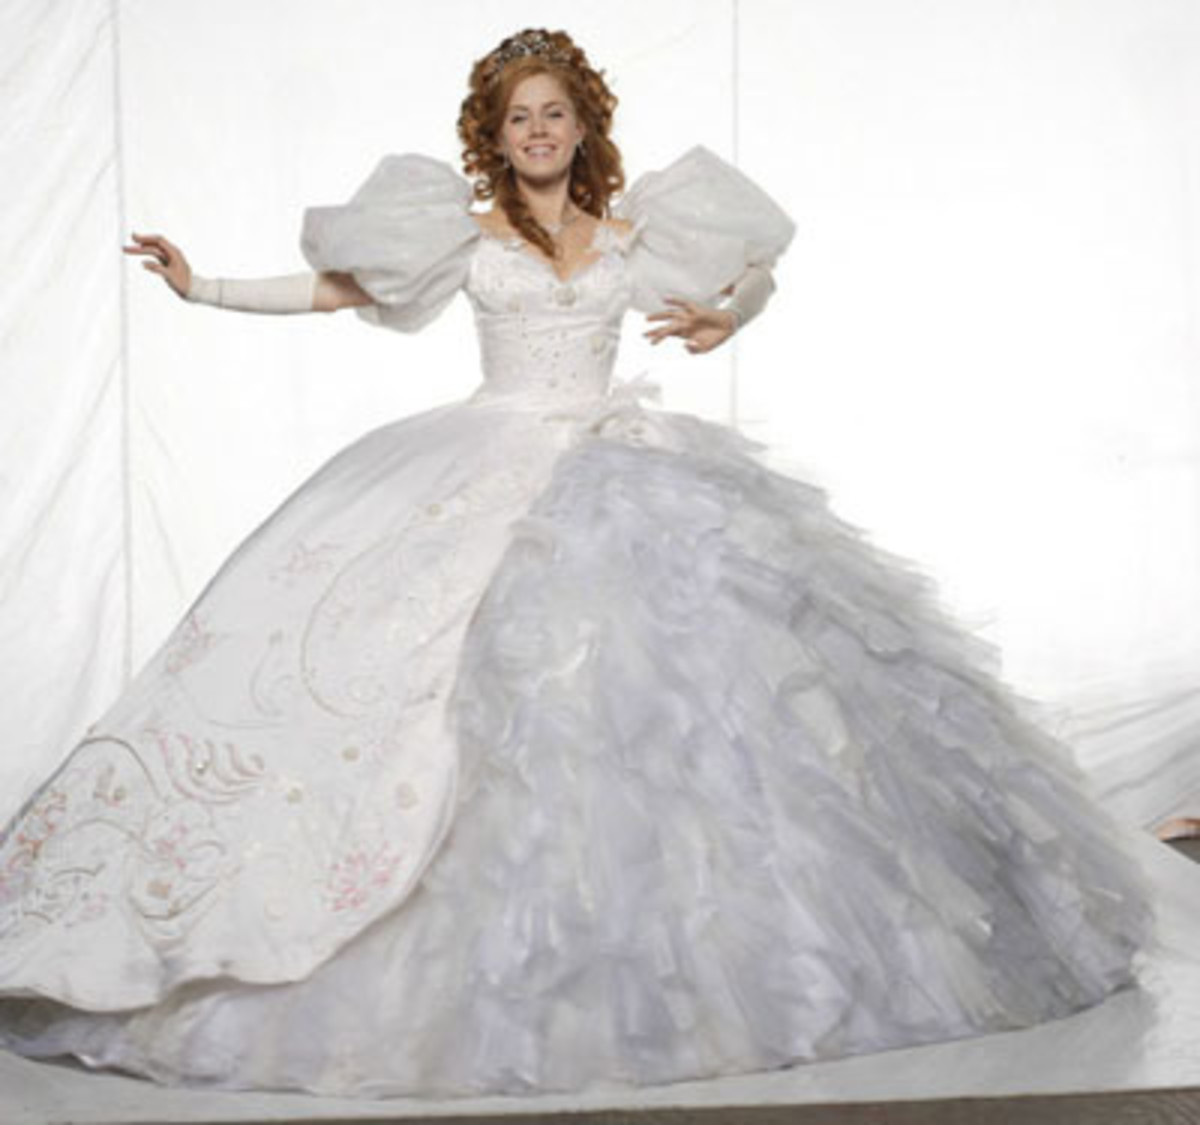 Giselle (Amy Adams) from Enchanted